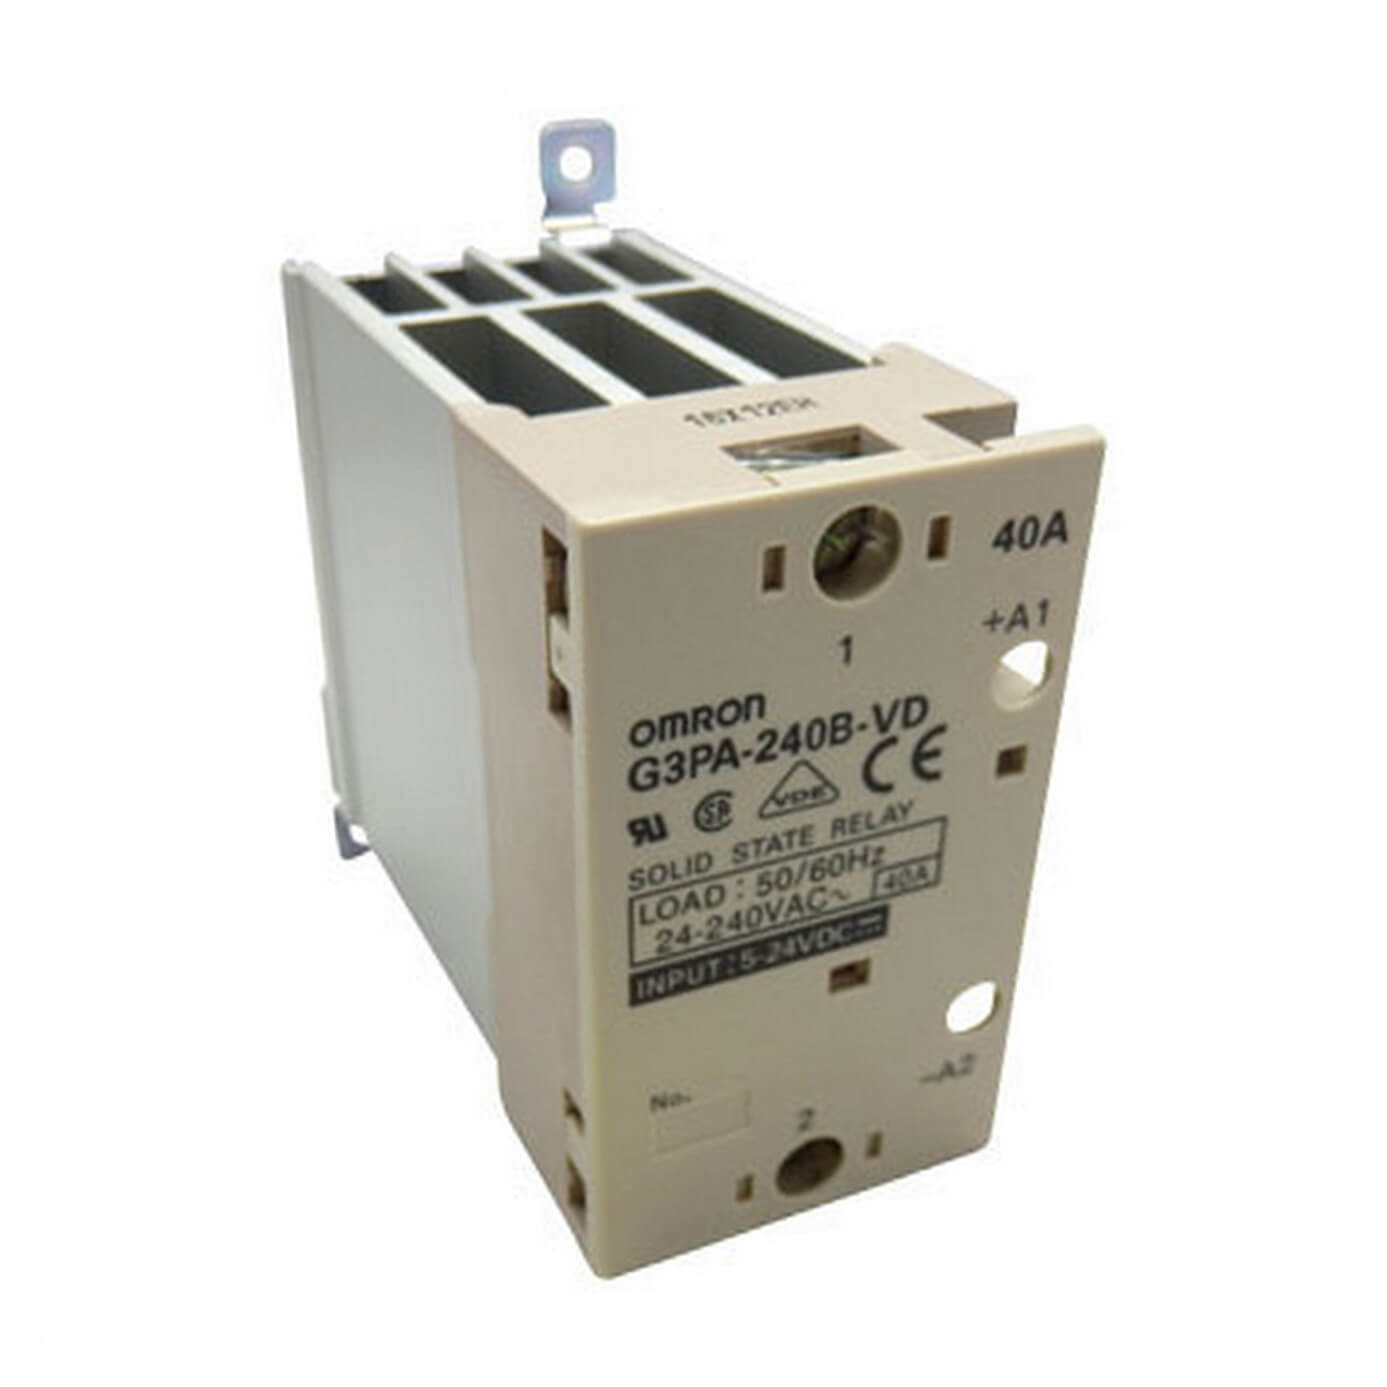 Omron Solid State Relays For Heaters G3PA